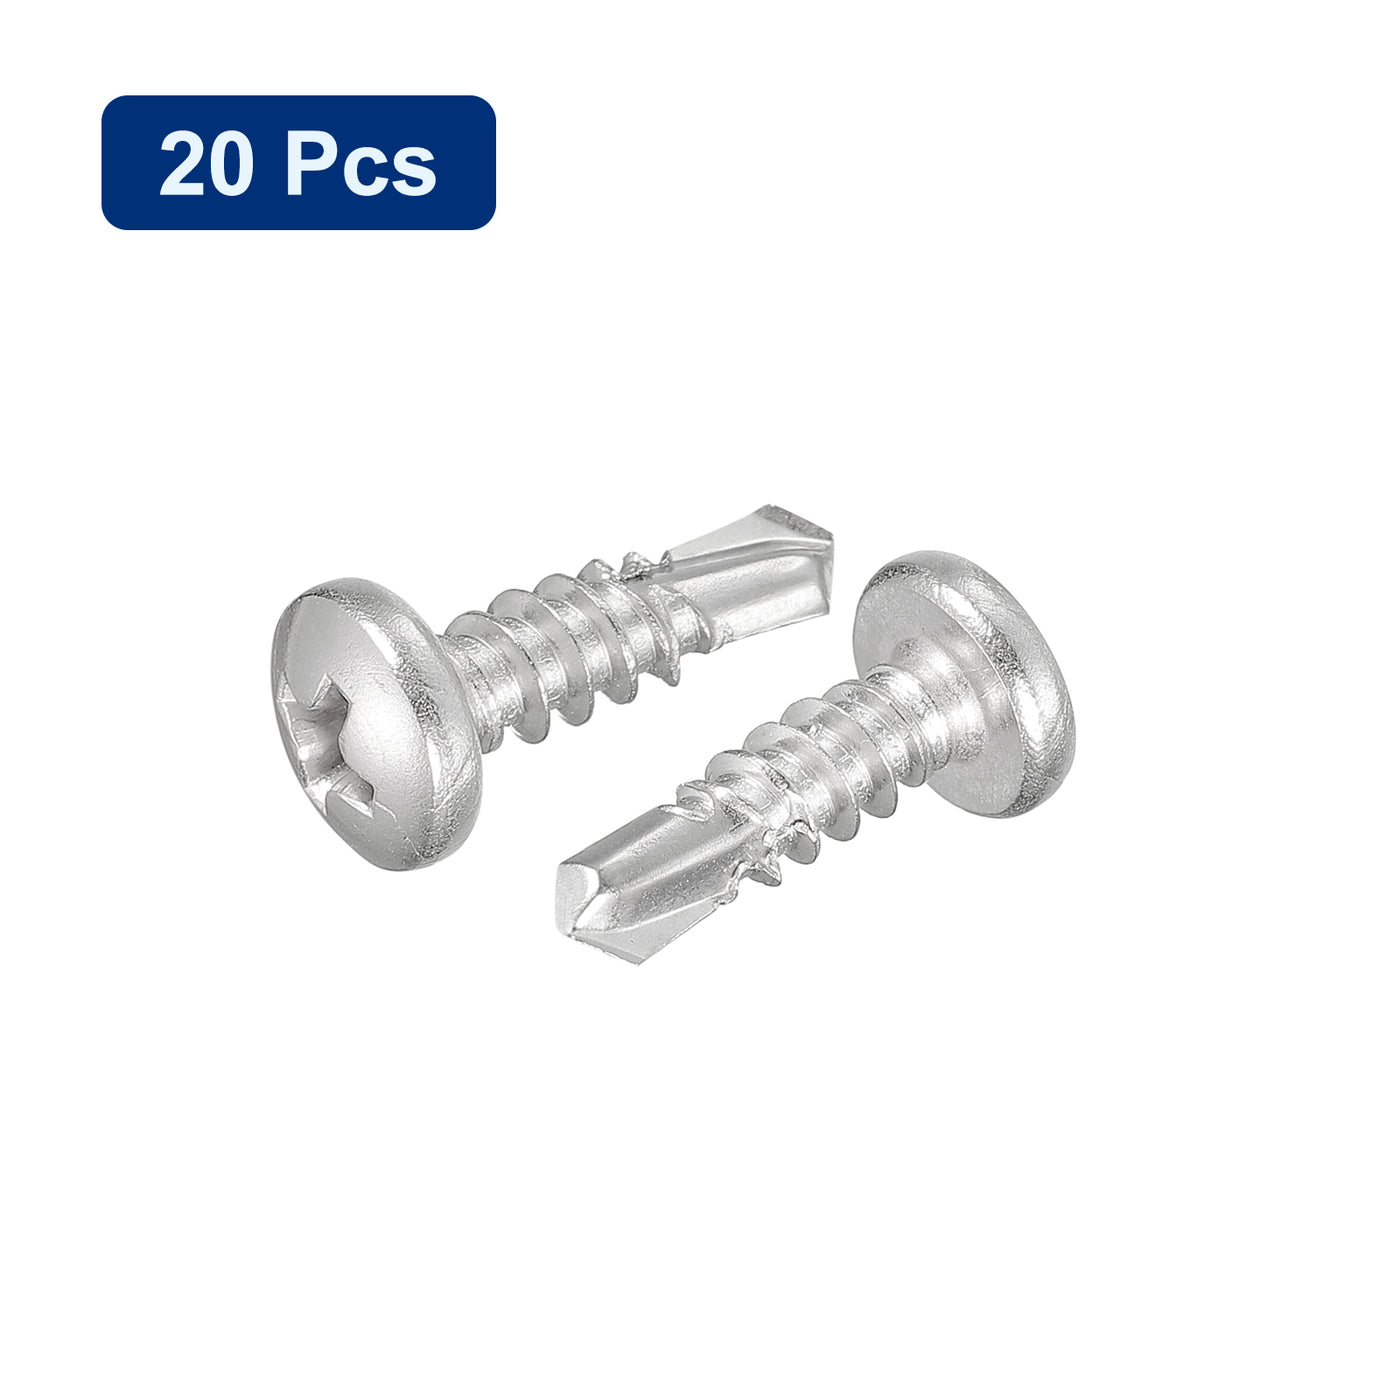 uxcell Uxcell #10 x 5/8" Self Drilling Screws, 20pcs Phillips Pan Head Self Tapping Screws